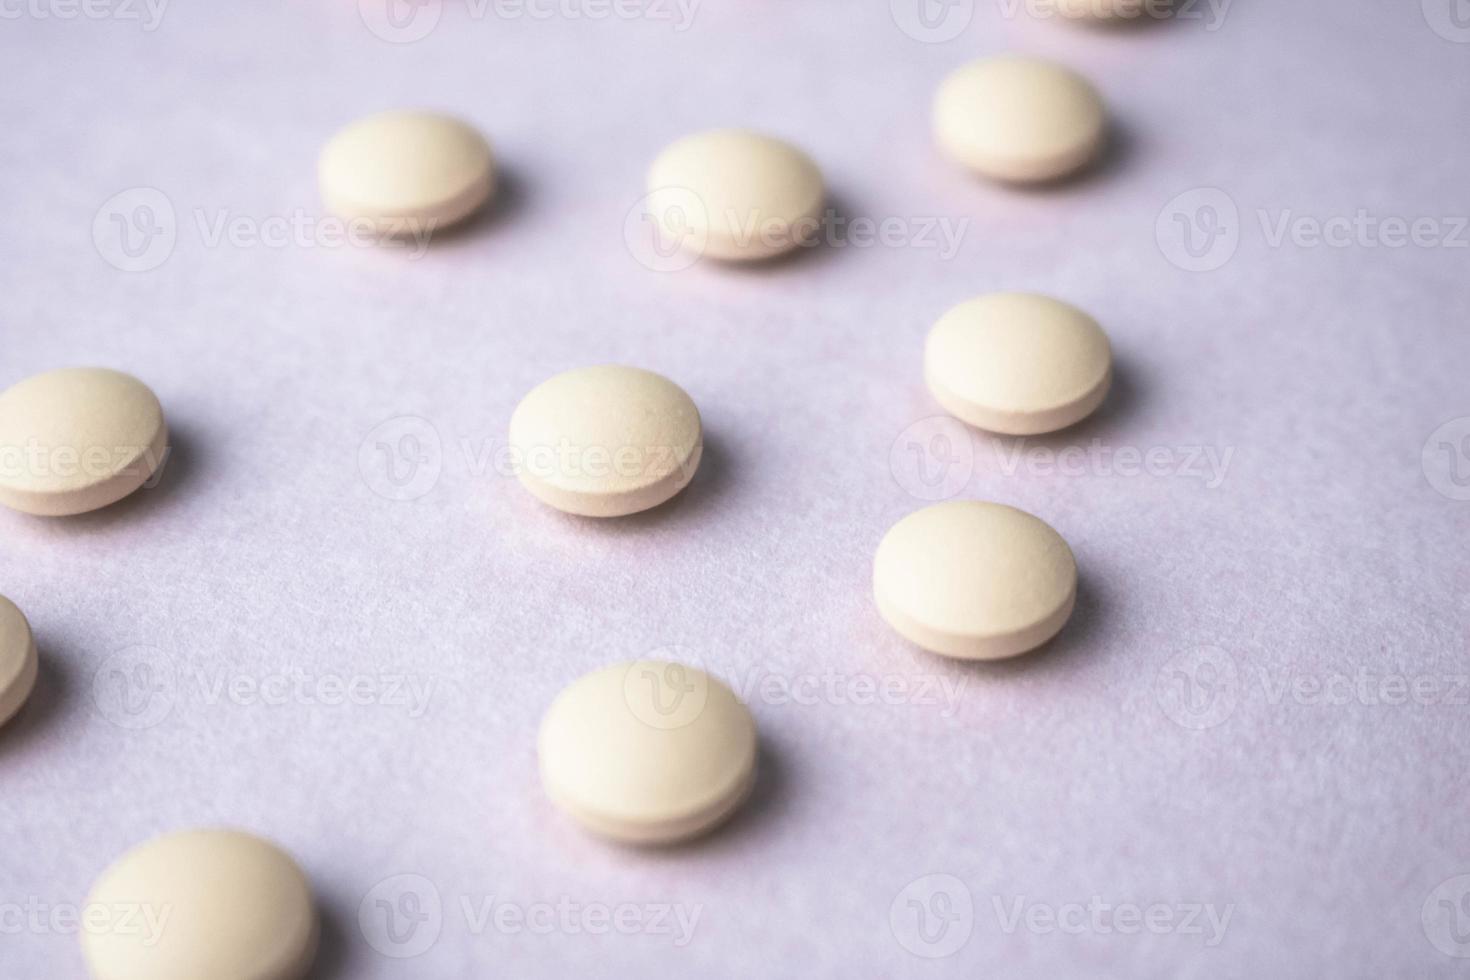 Little beautiful medical pharmaceptic round pills, vitamins, drugs, antibiotics on a black and white background, texture. Concept medicine, health care. Flat lay, top view photo